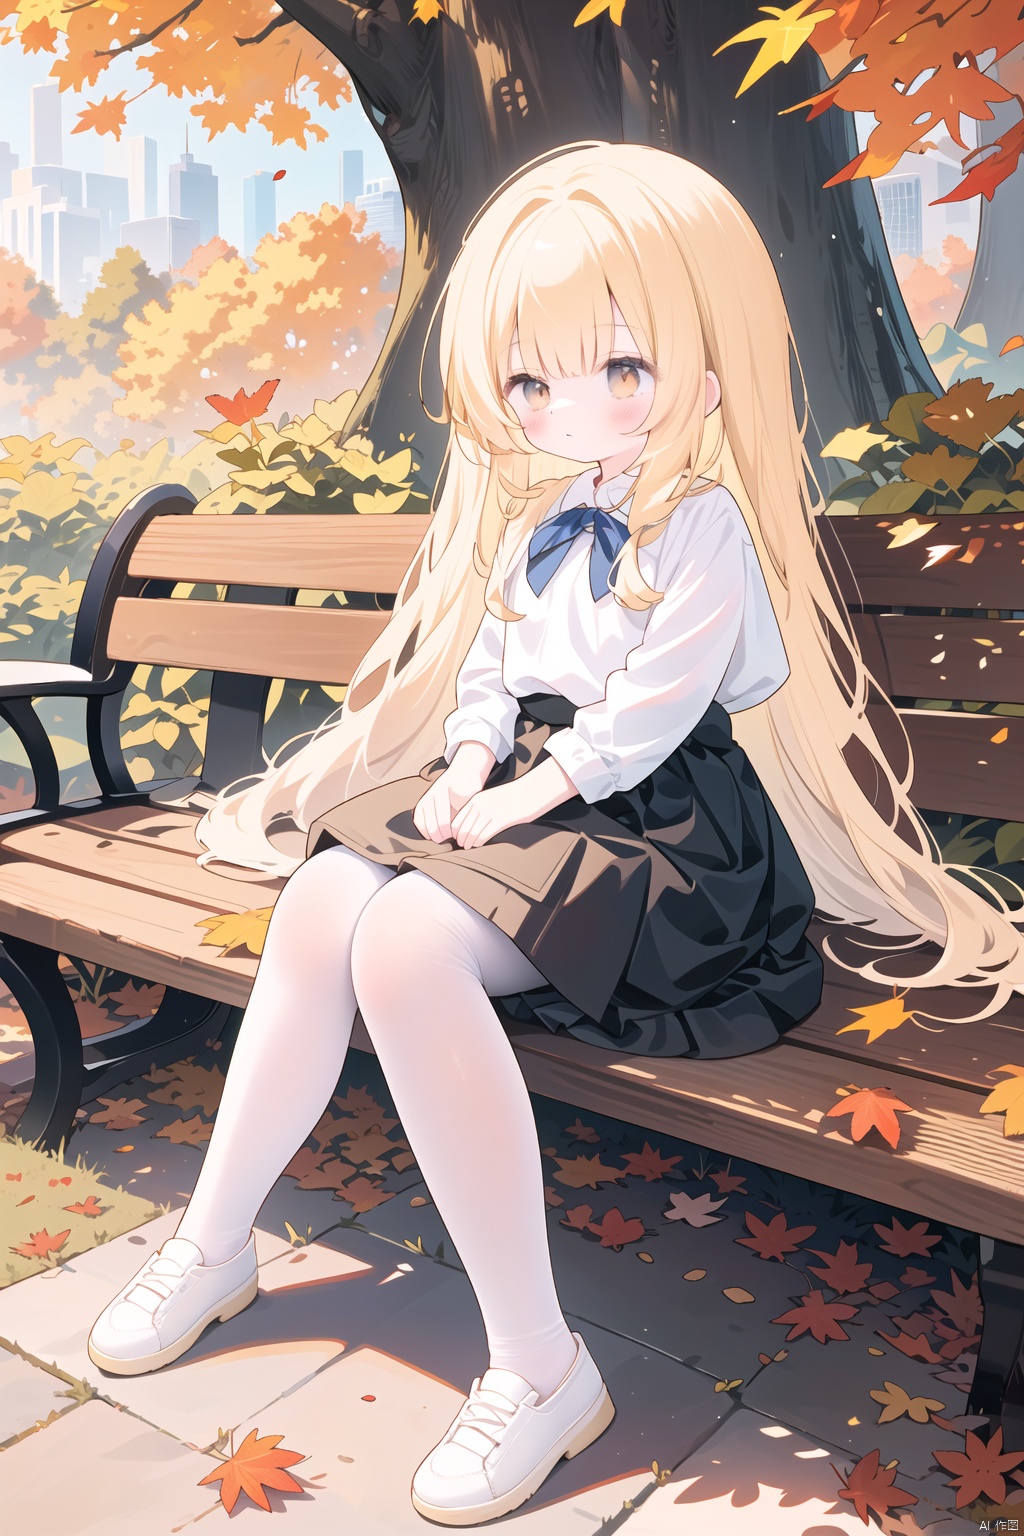  Autumn girl, park bench, falling leaves, autumn is getting stronger, delicate, lifelike, high definition, sunshine, mottled light and shadow, long golden hair and skirt, white shoes and pantyhose, autumn colors, quiet thinking , gentle and harmonious, carefully painted with details, touchable tenderness and autumn atmosphere, the girl blends with the park environment